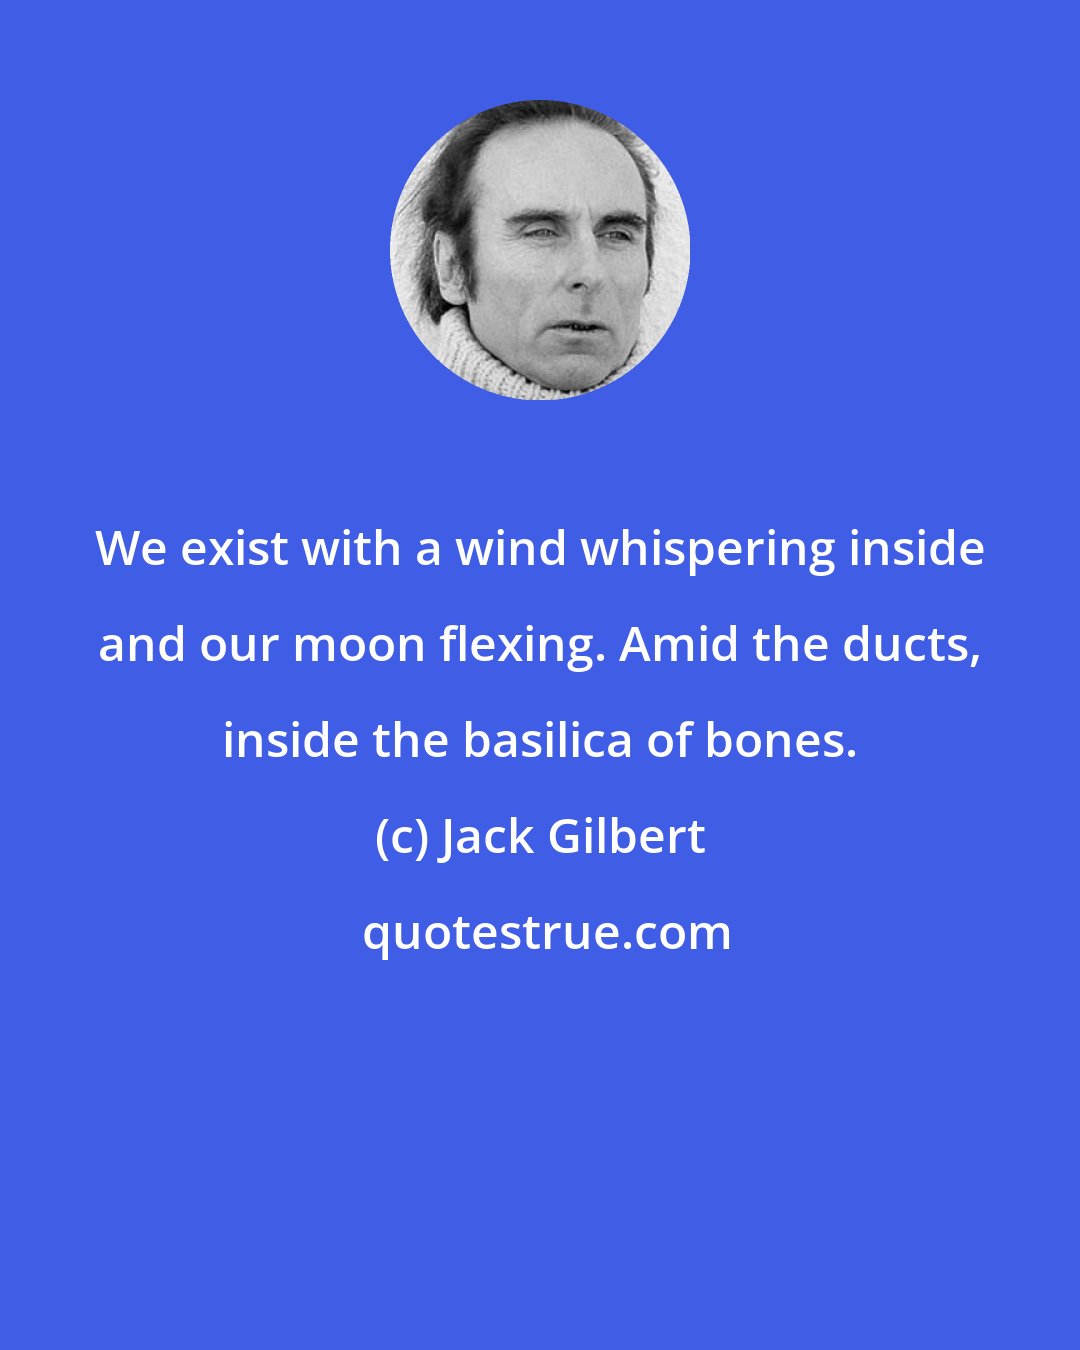 Jack Gilbert: We exist with a wind whispering inside and our moon flexing. Amid the ducts, inside the basilica of bones.